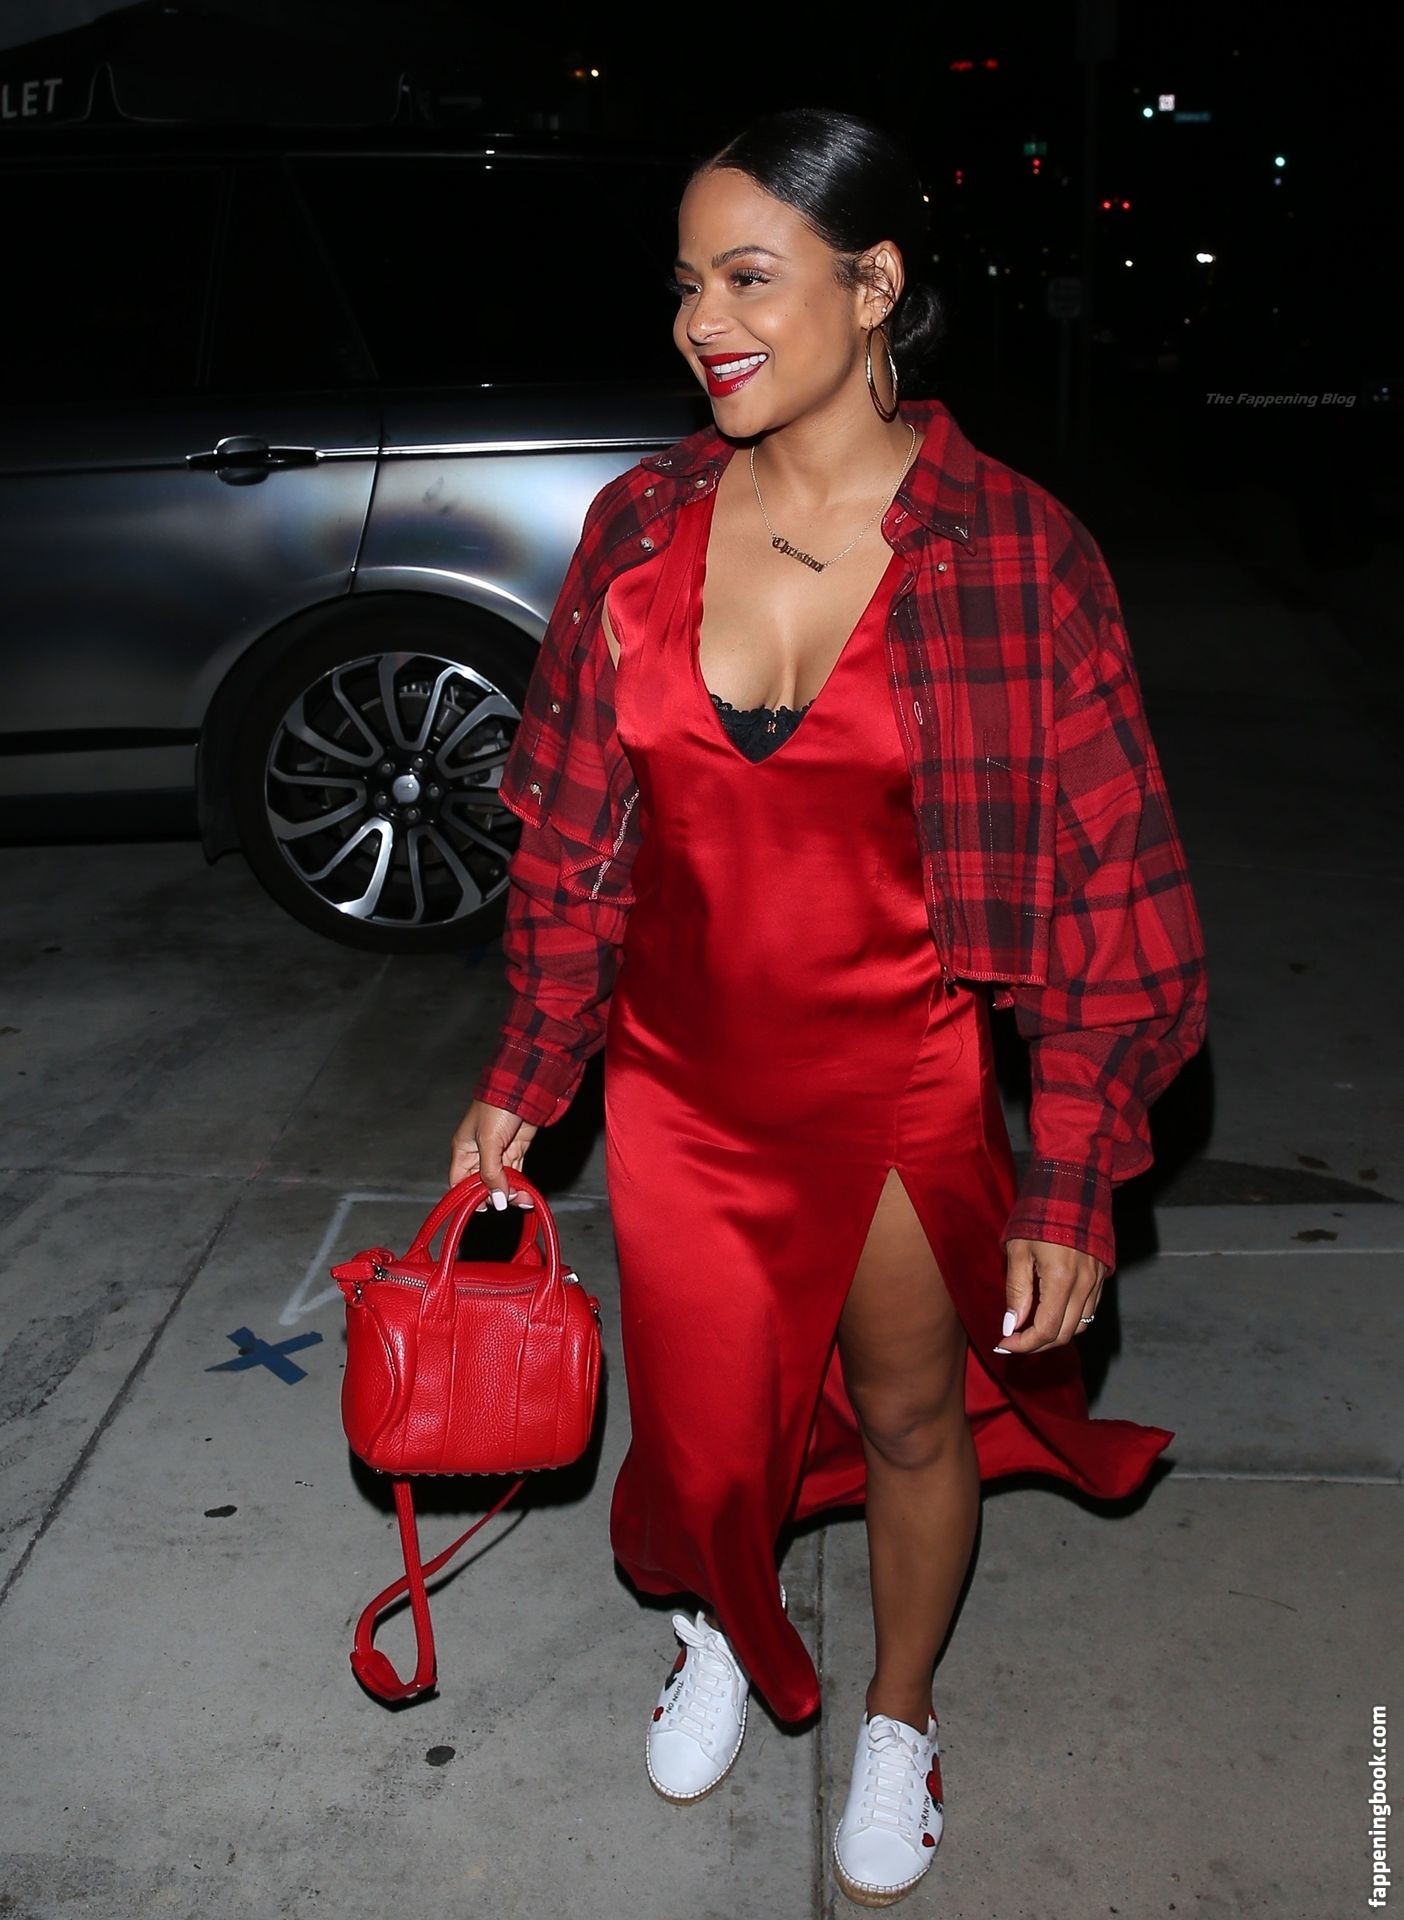 Christina Milian Kacytgirl Nude Onlyfans Leaks The Fappening Photo 1305680 Fappeningbook 